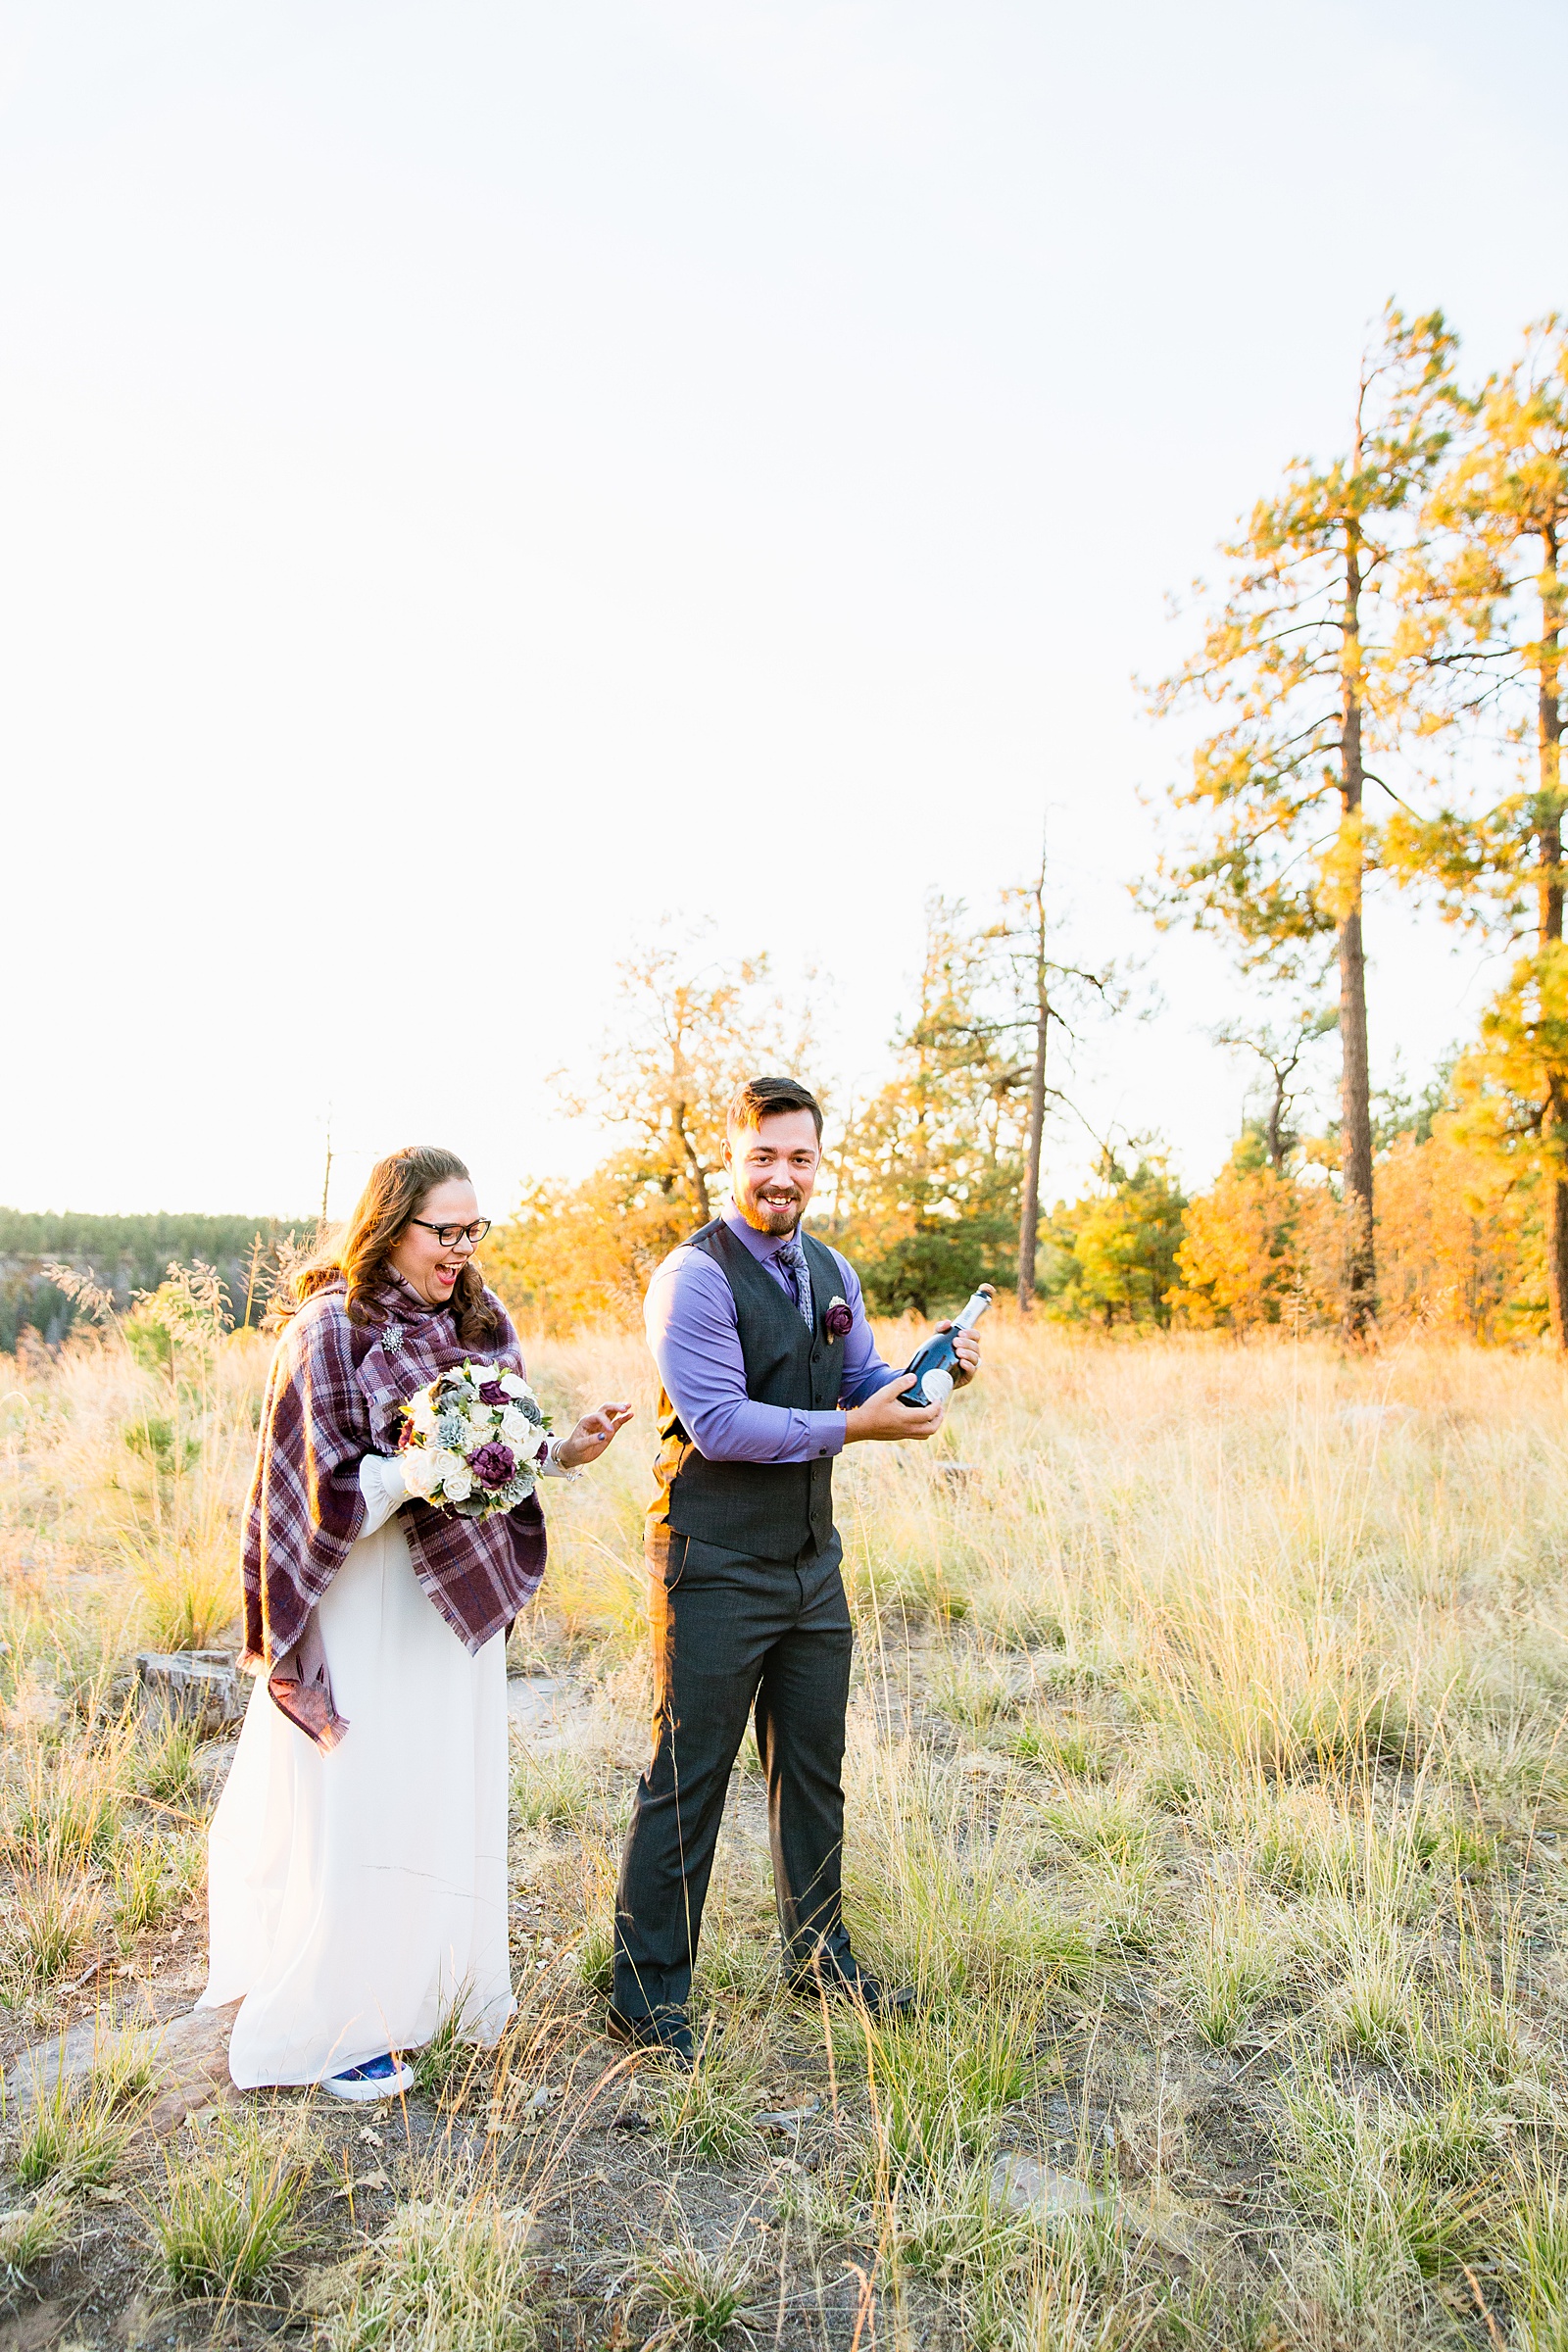 Bride and groom popping champagne to celebrate their Mogollon Rim elopement by Payson elopement photographer PMA Photography.